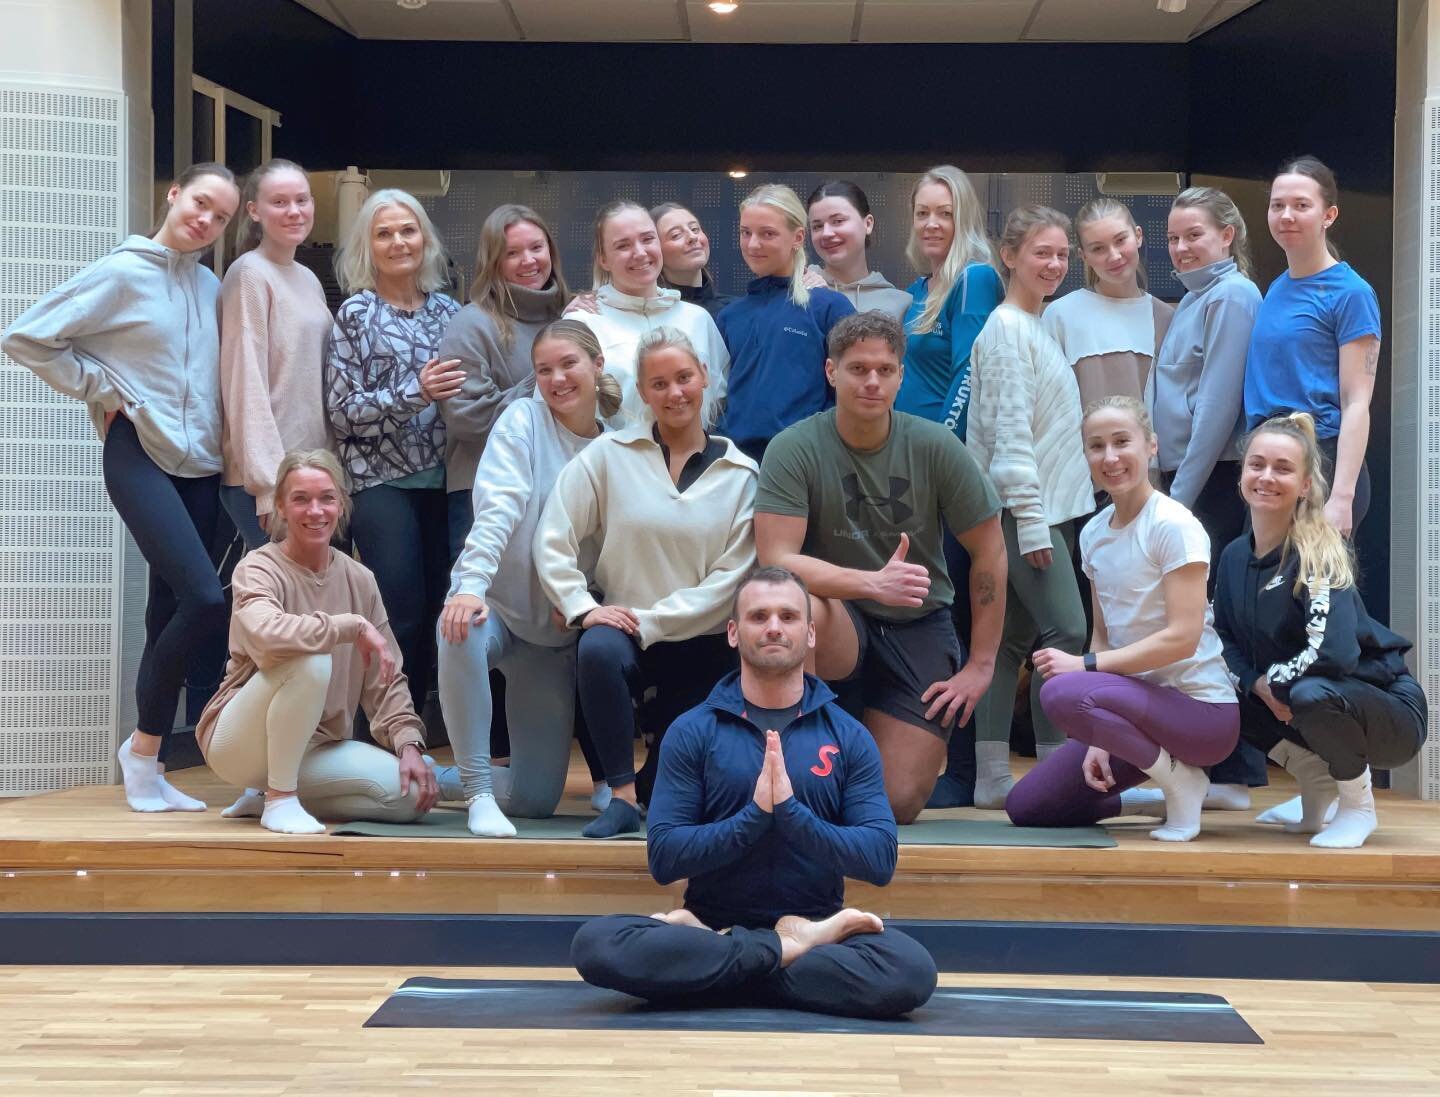 Stockholm is always beautiful, but these people made it even better 🥰 Good luck with teaching amazing classes for @vingresor @vingreiser 🙏 #yogasweden #yogatravels #yogaretreats #yogaeducation #satsyoga